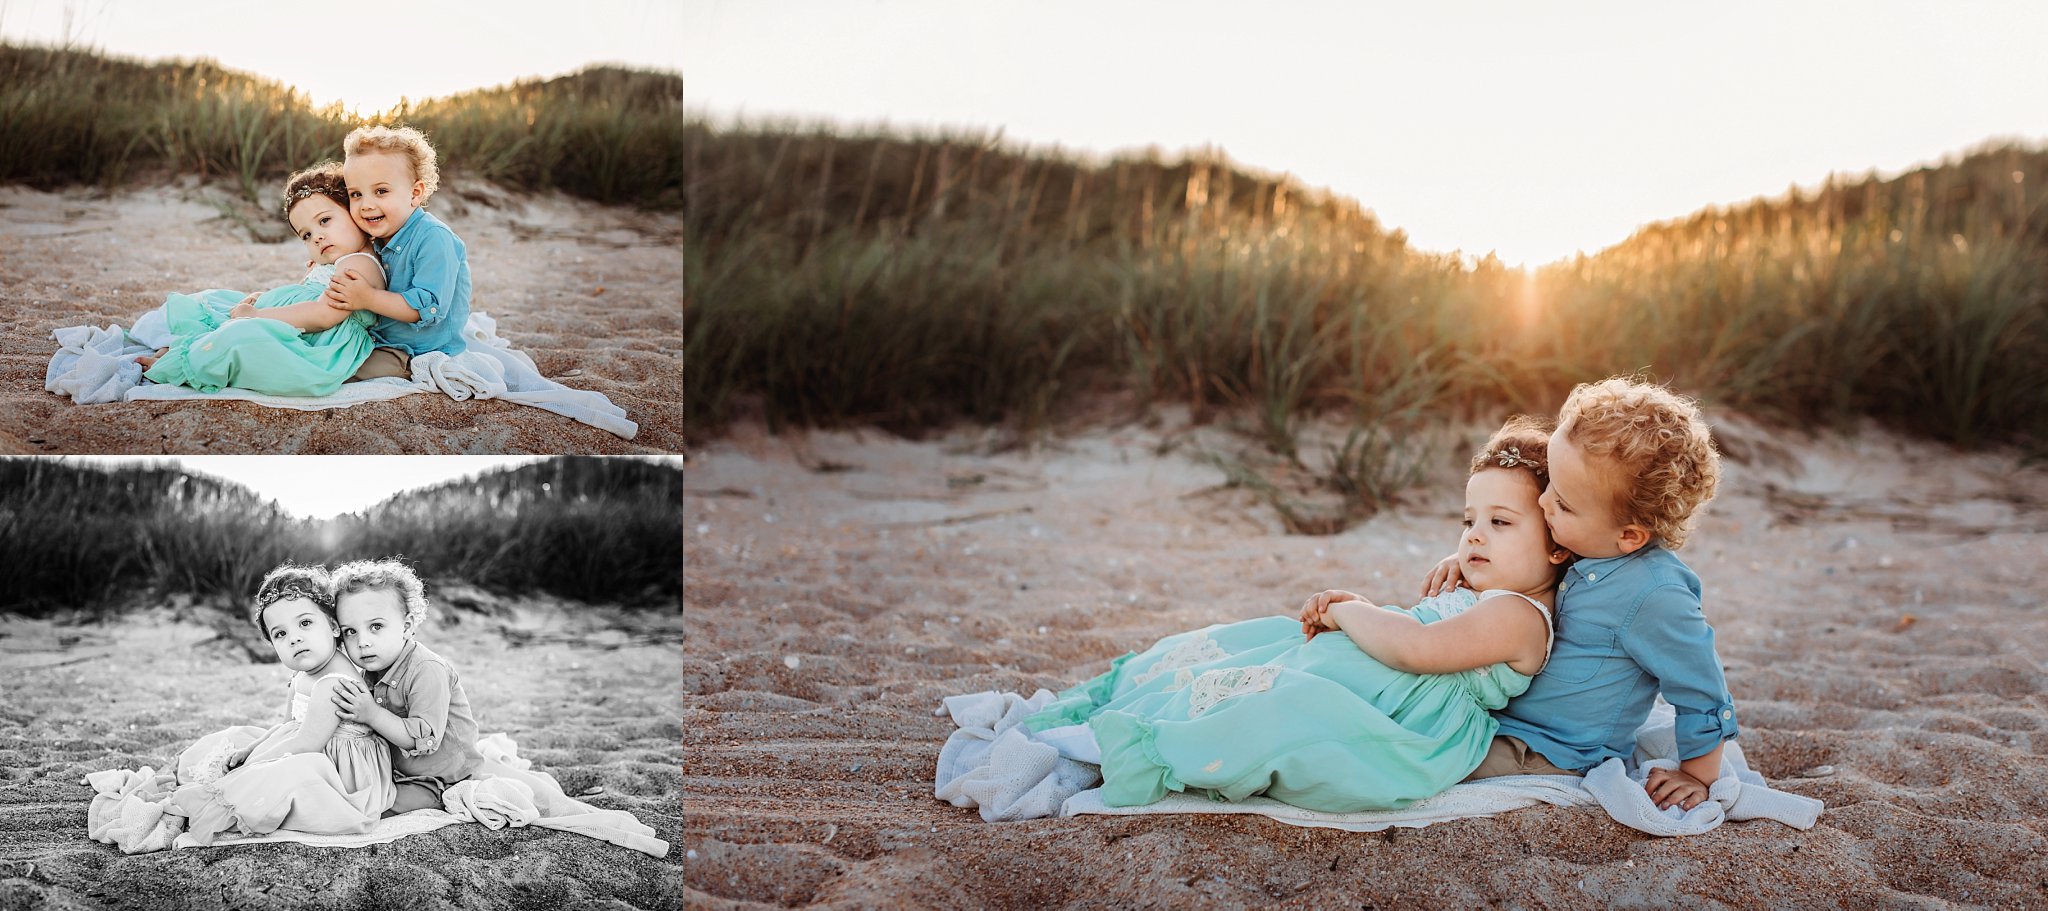 twin beach session boy girl twins snuggling on sunlit beach on white lace blanket